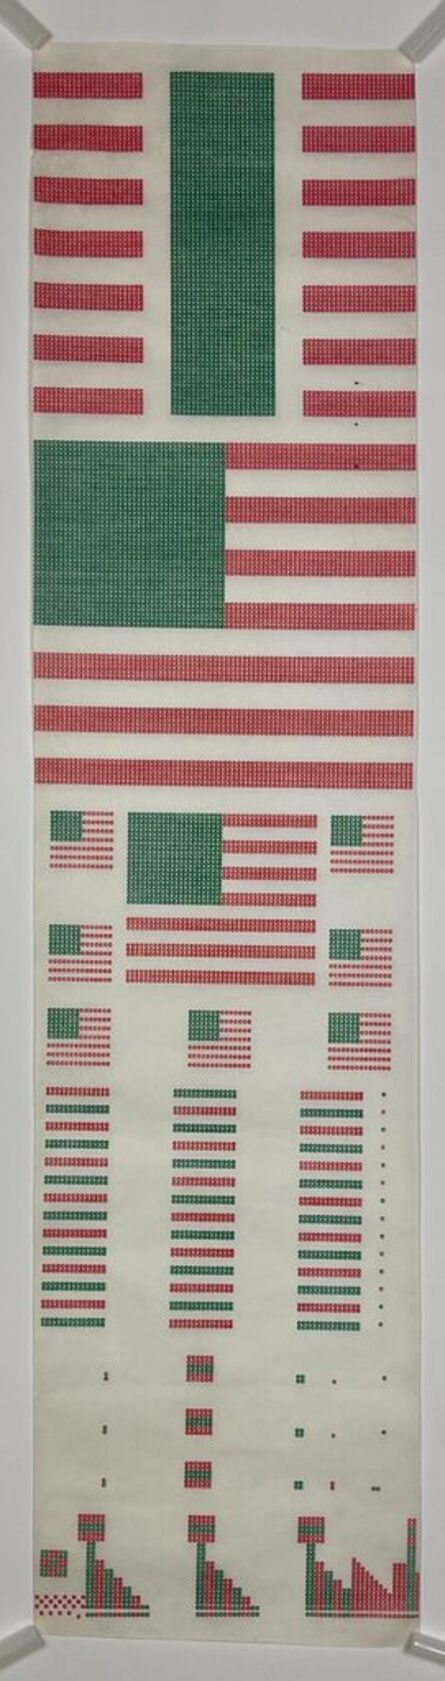 Christopher Knowles, ‘The Flags Typing’, 1983